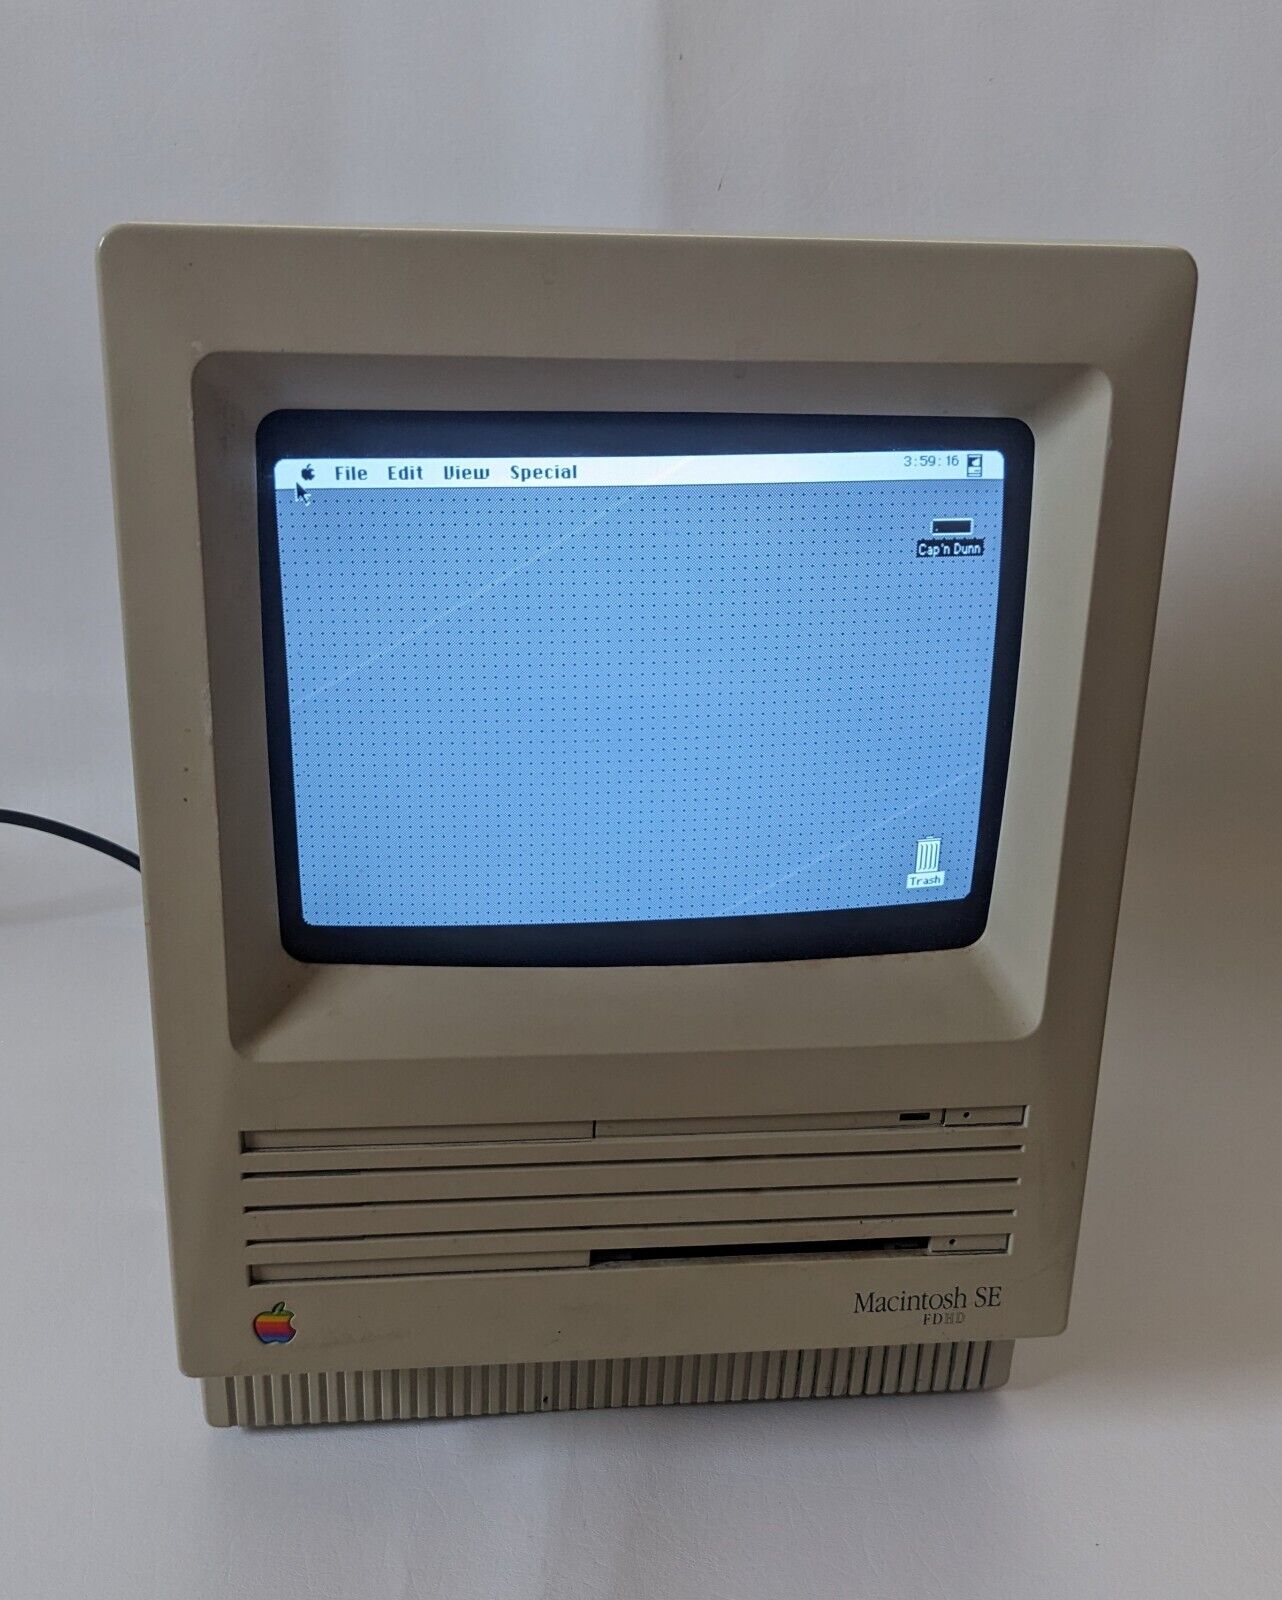 APPLE MACINTOSH SE FDHD All In One Vintage Computer - Model M5011 1988